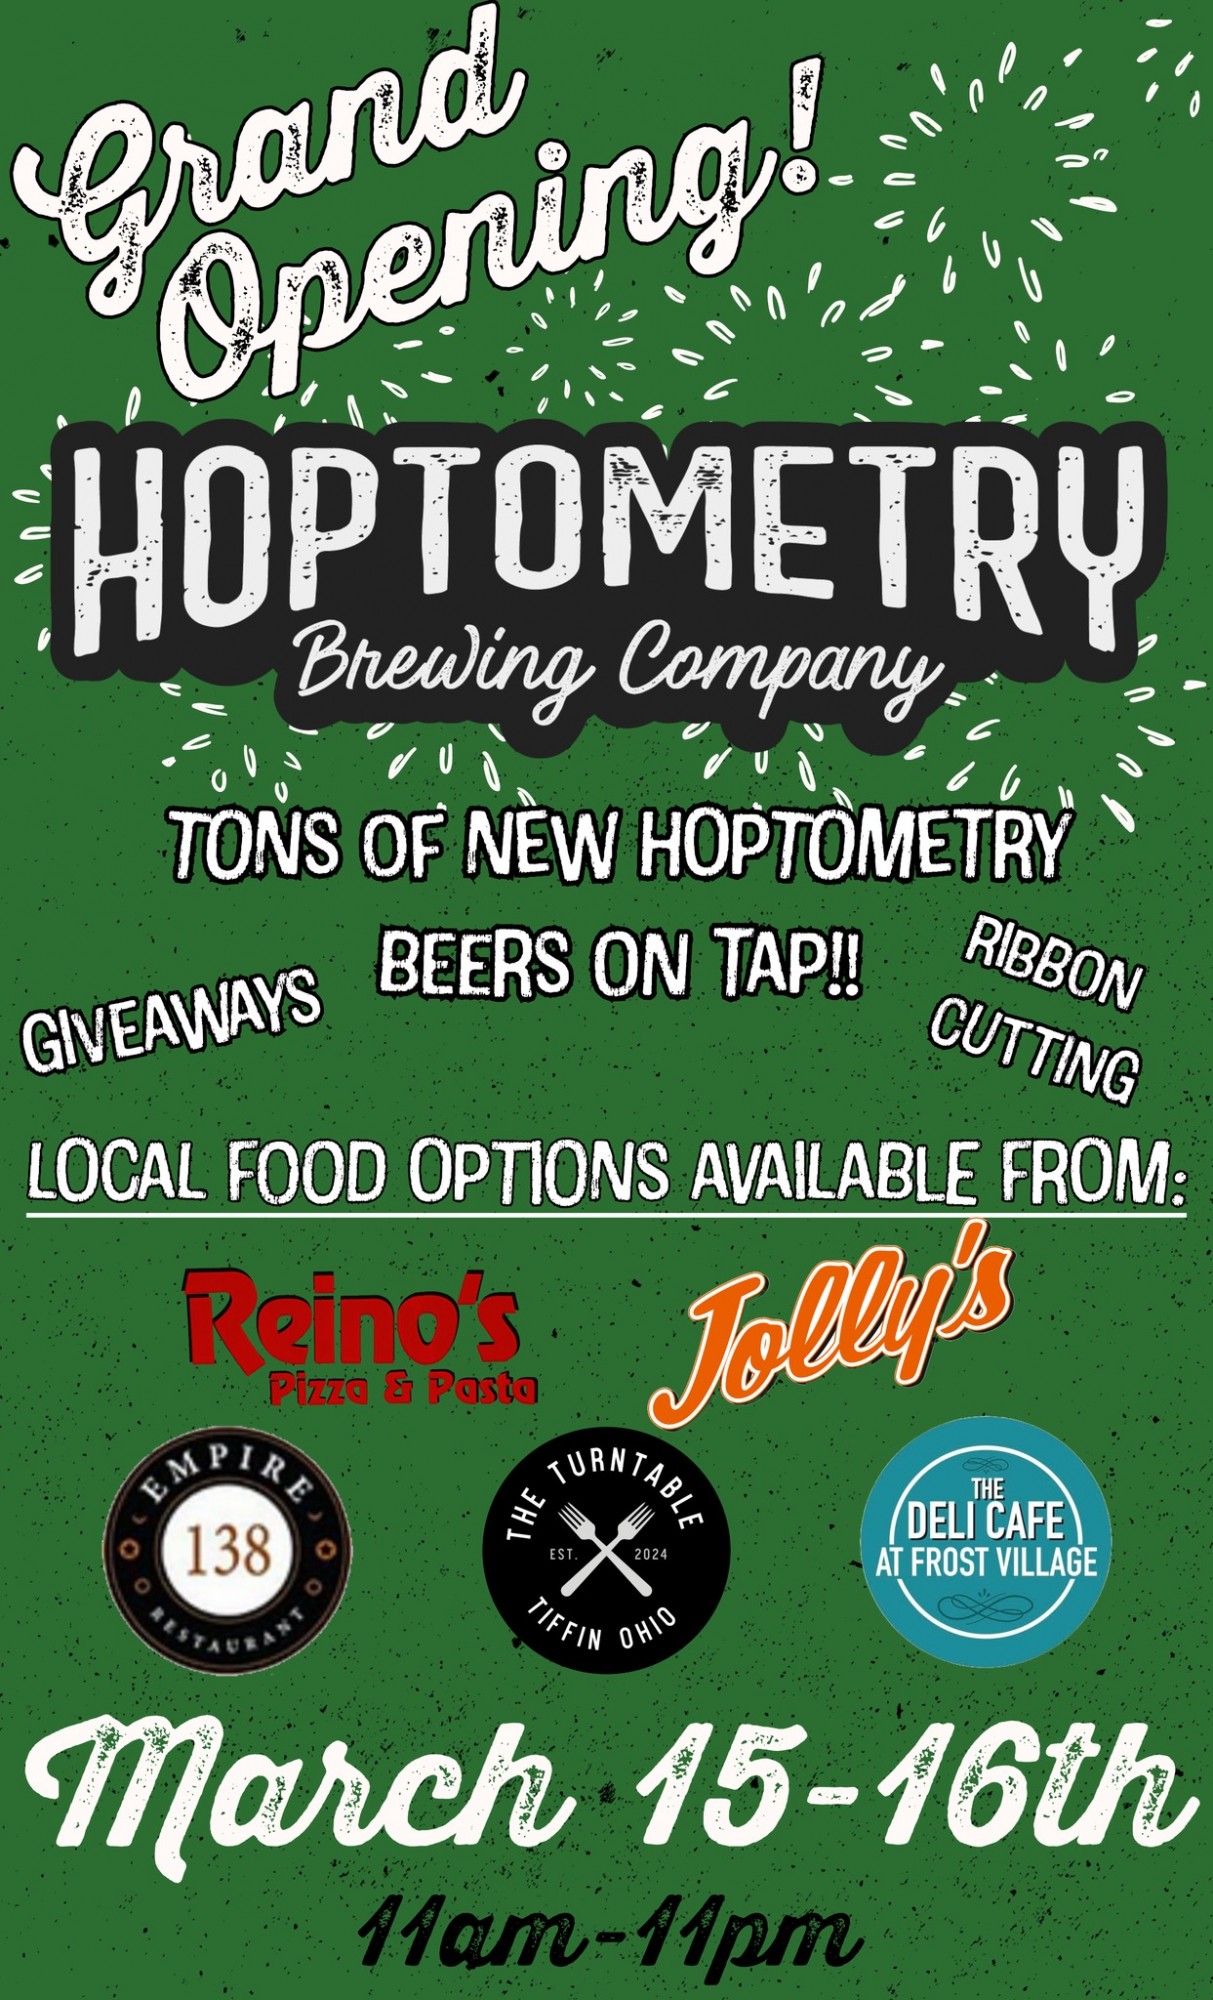 Hoptometry Brewing Company Grand Opening